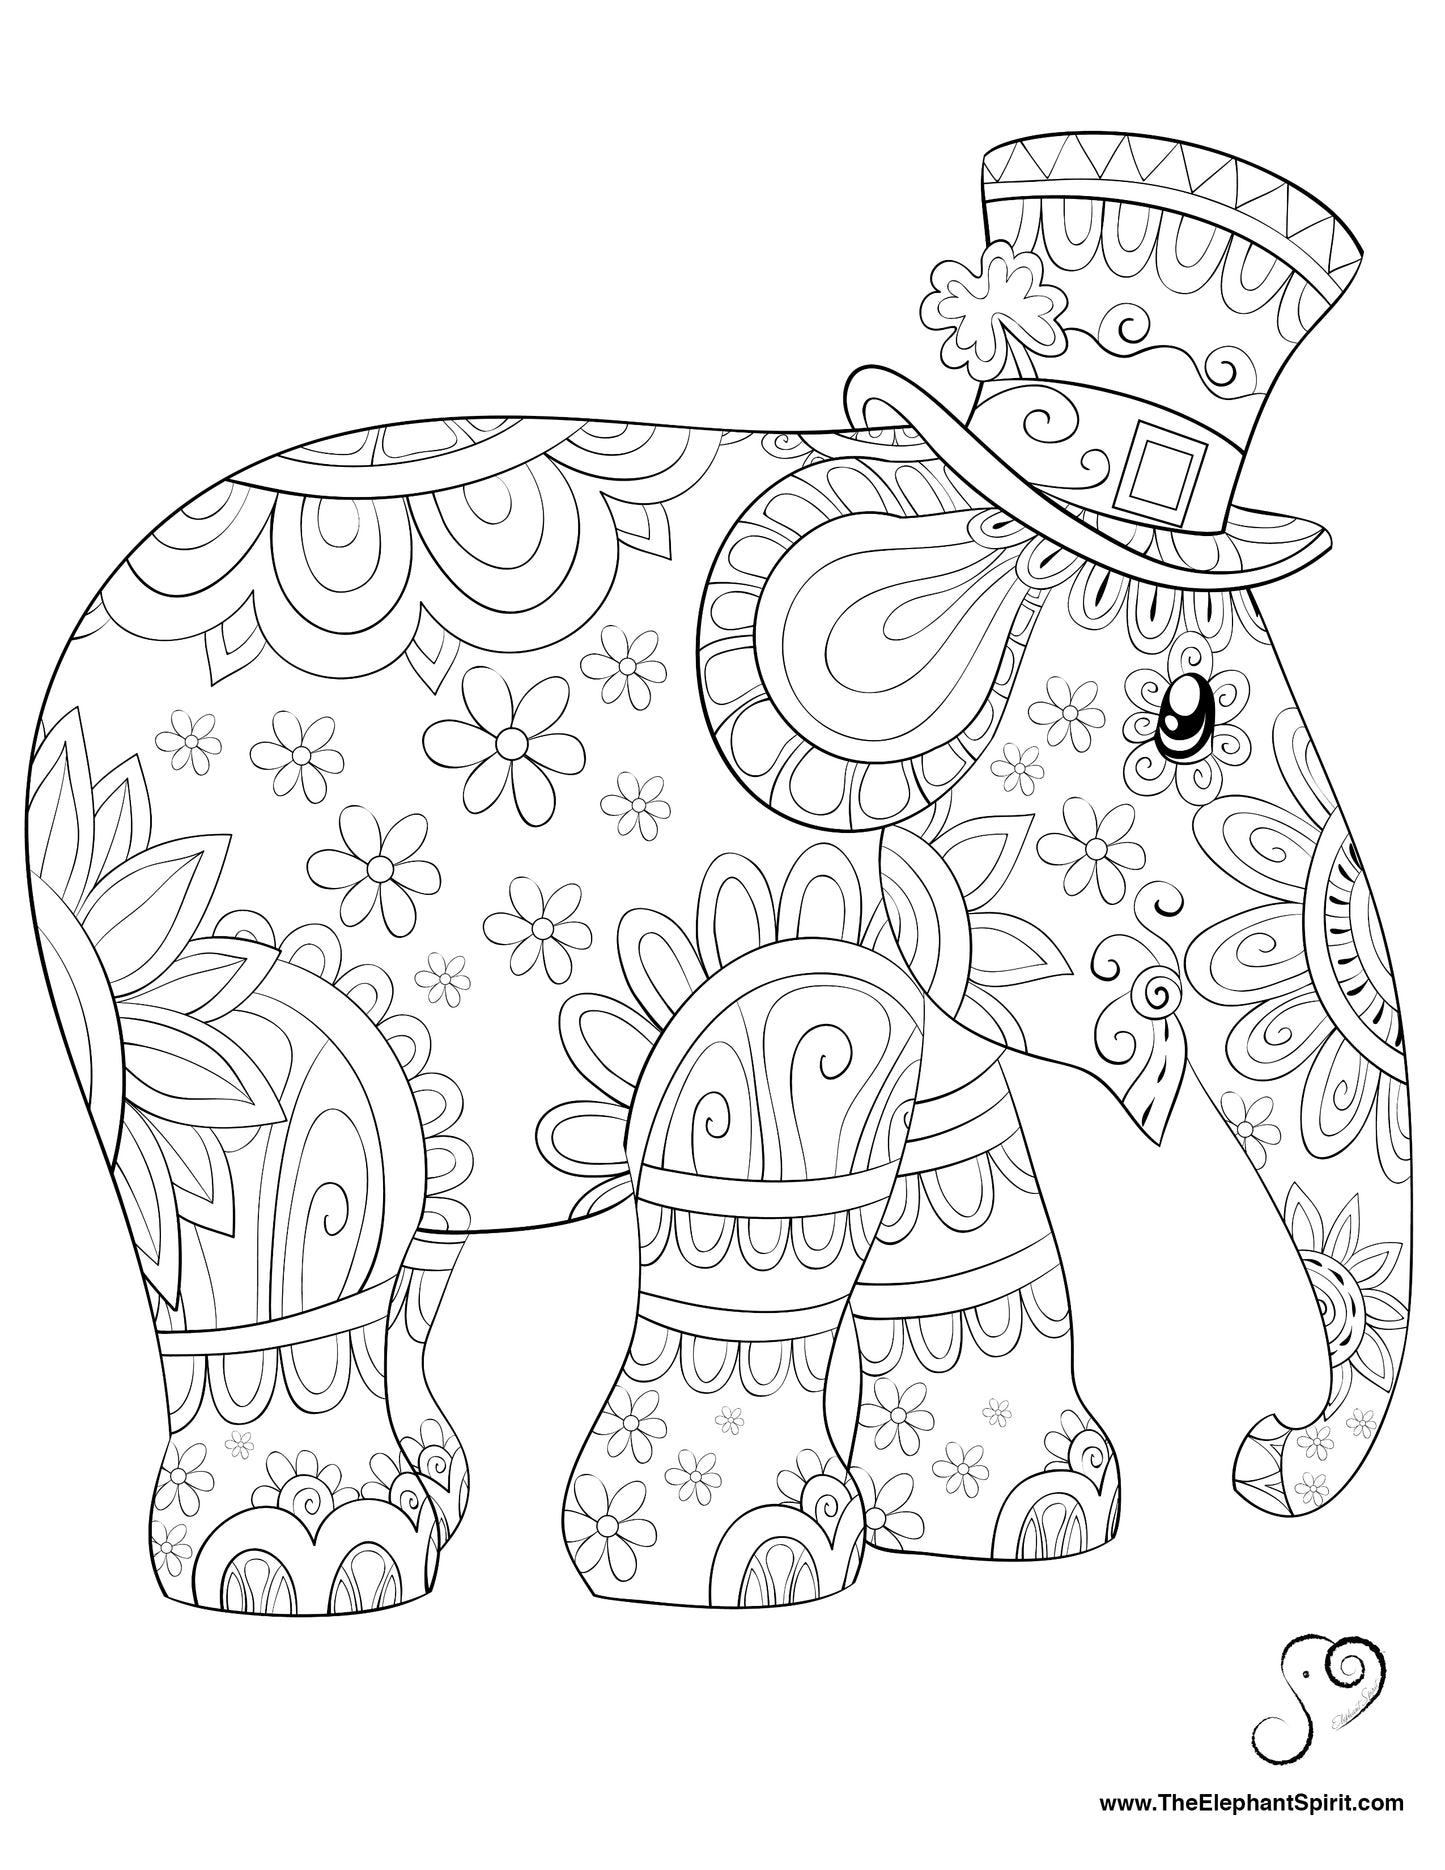 FREE Coloring Page 03-10